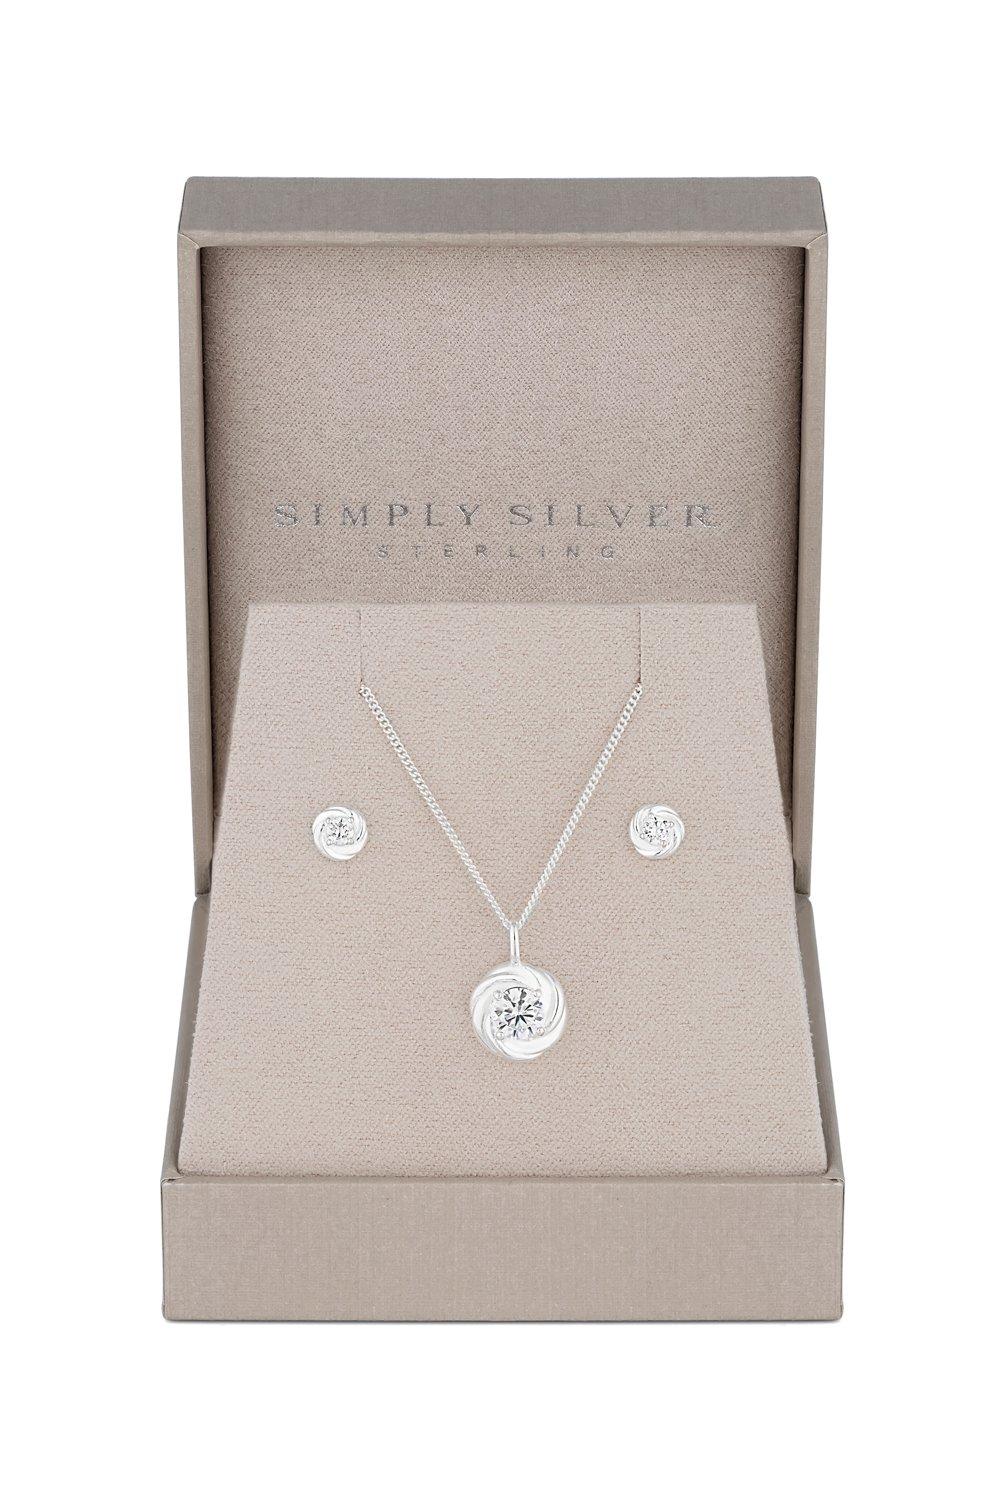 Simply Silver Women's Sterling Silver 925 Cubic Zirconia Knot Set - Gift Boxed|silver